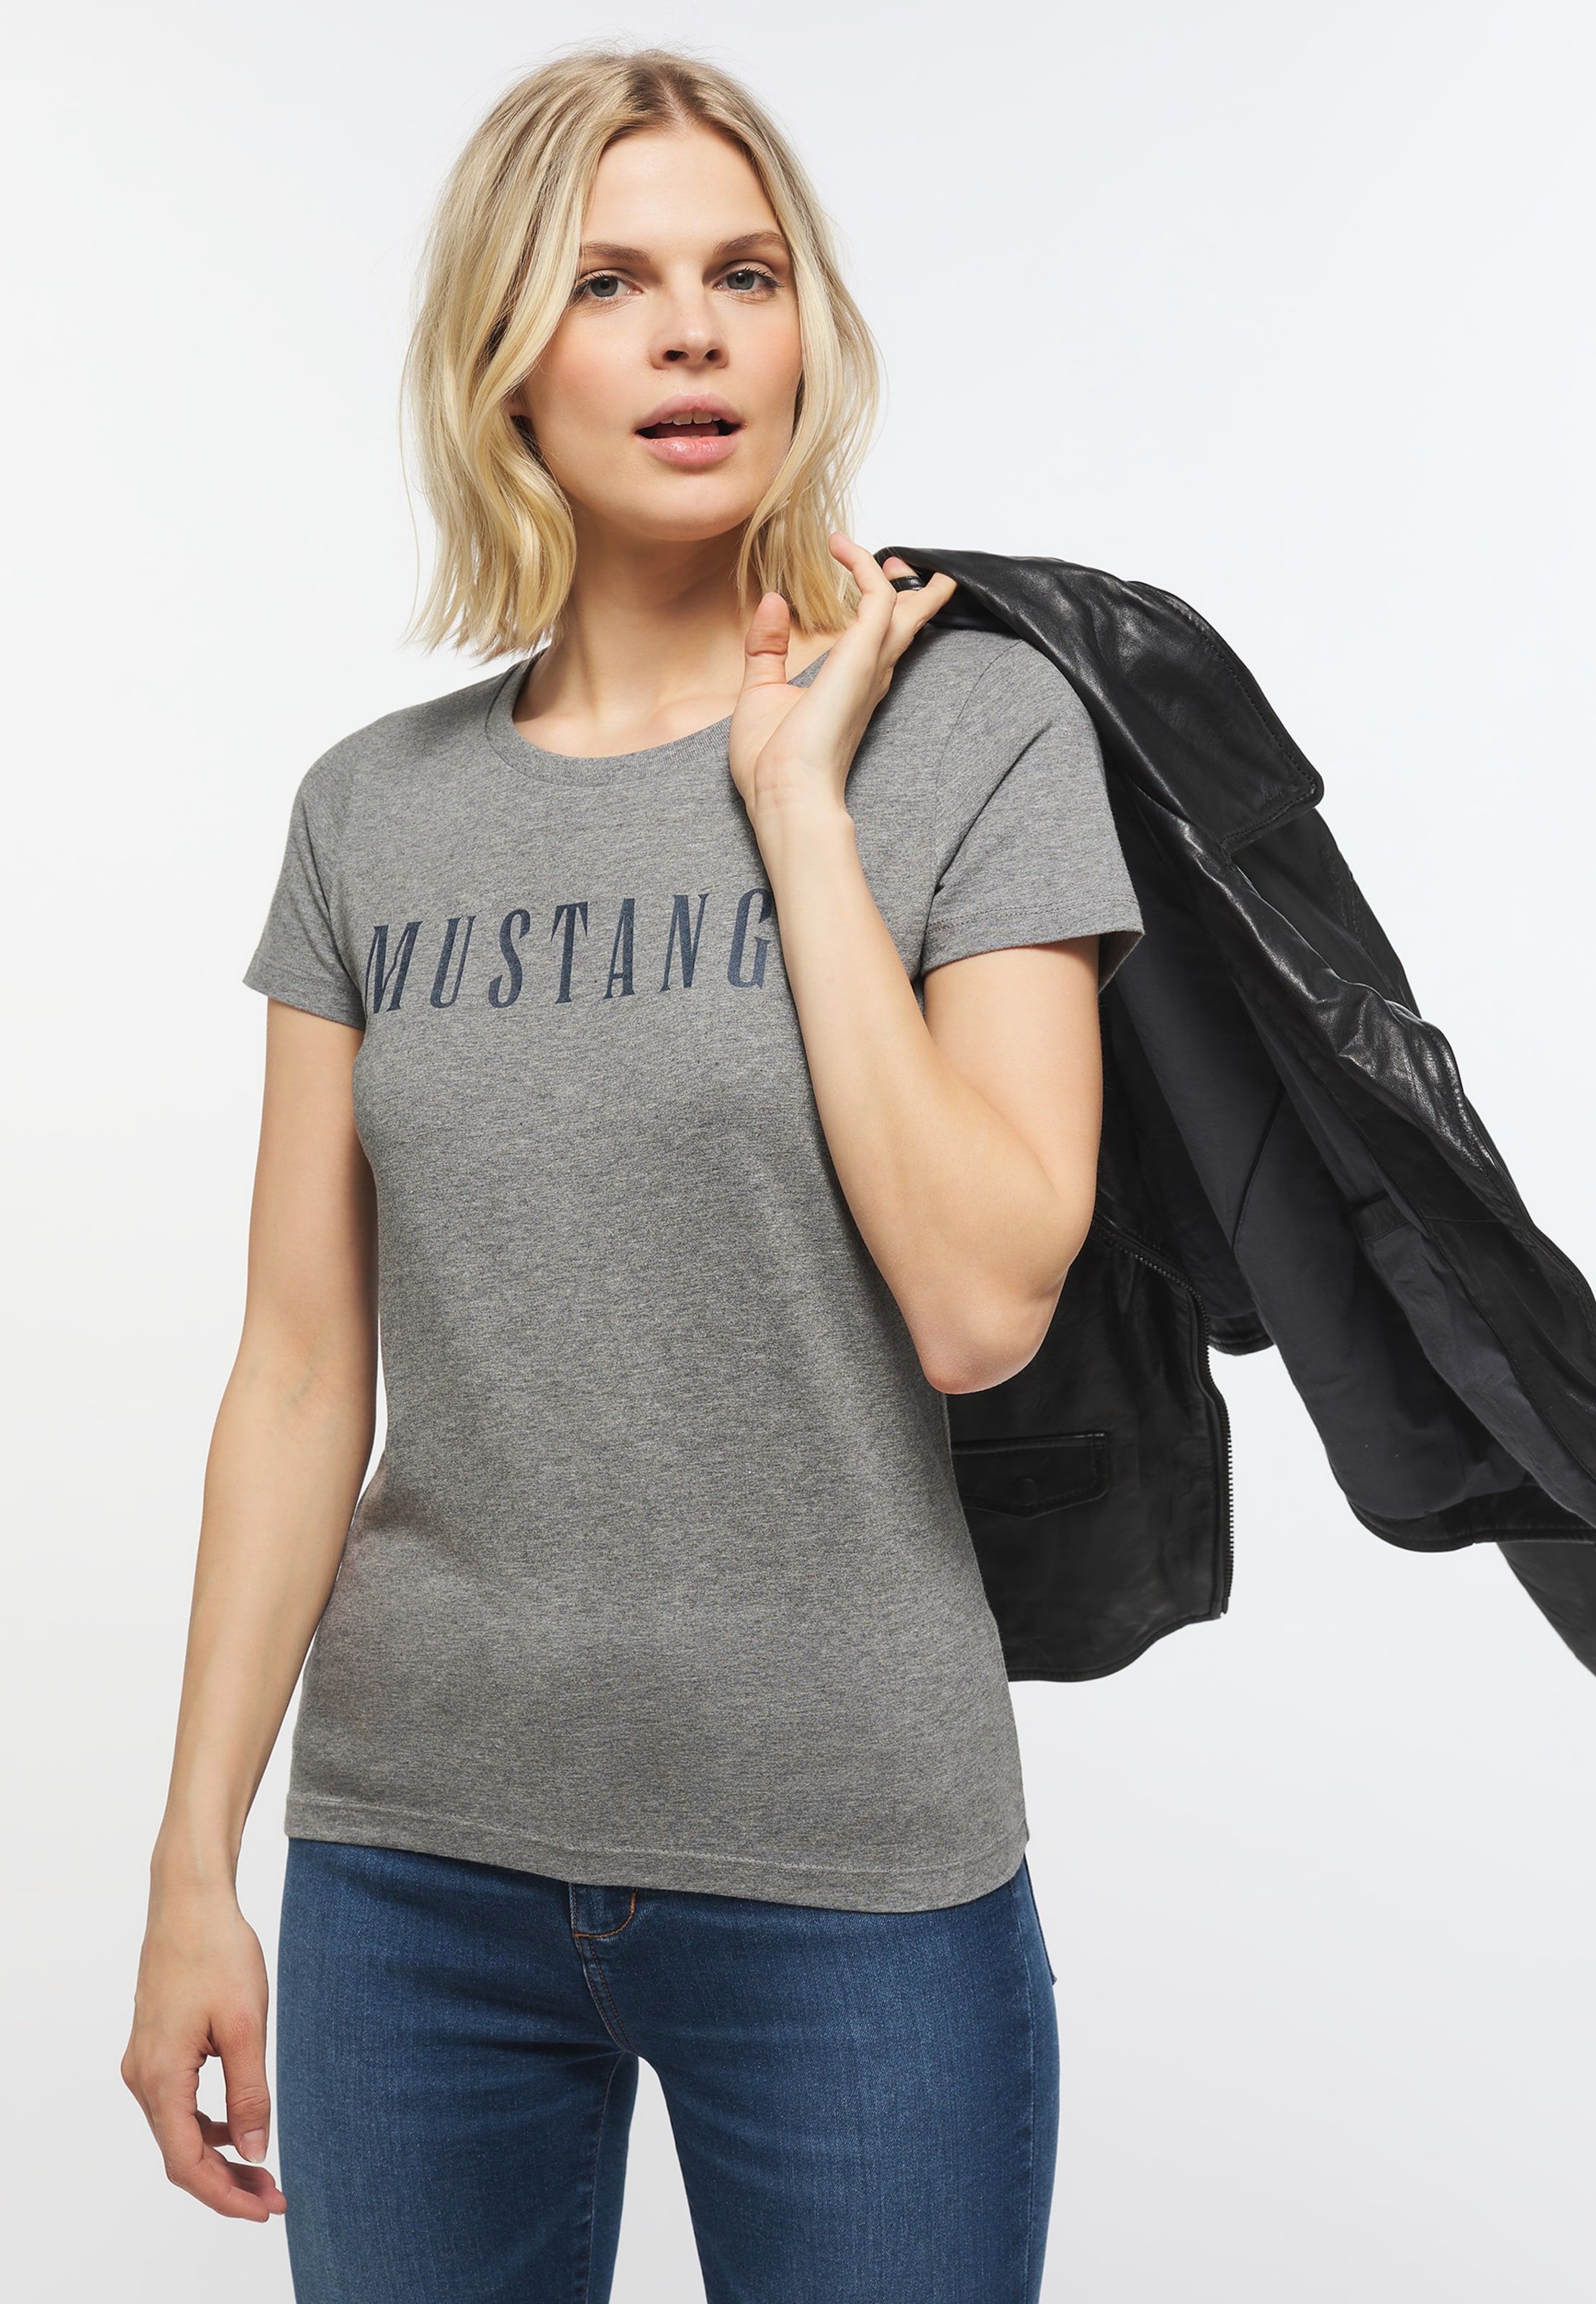 MUSTANG T-Shirt ABOUT YOU in | Dunkelgrau, Graumeliert